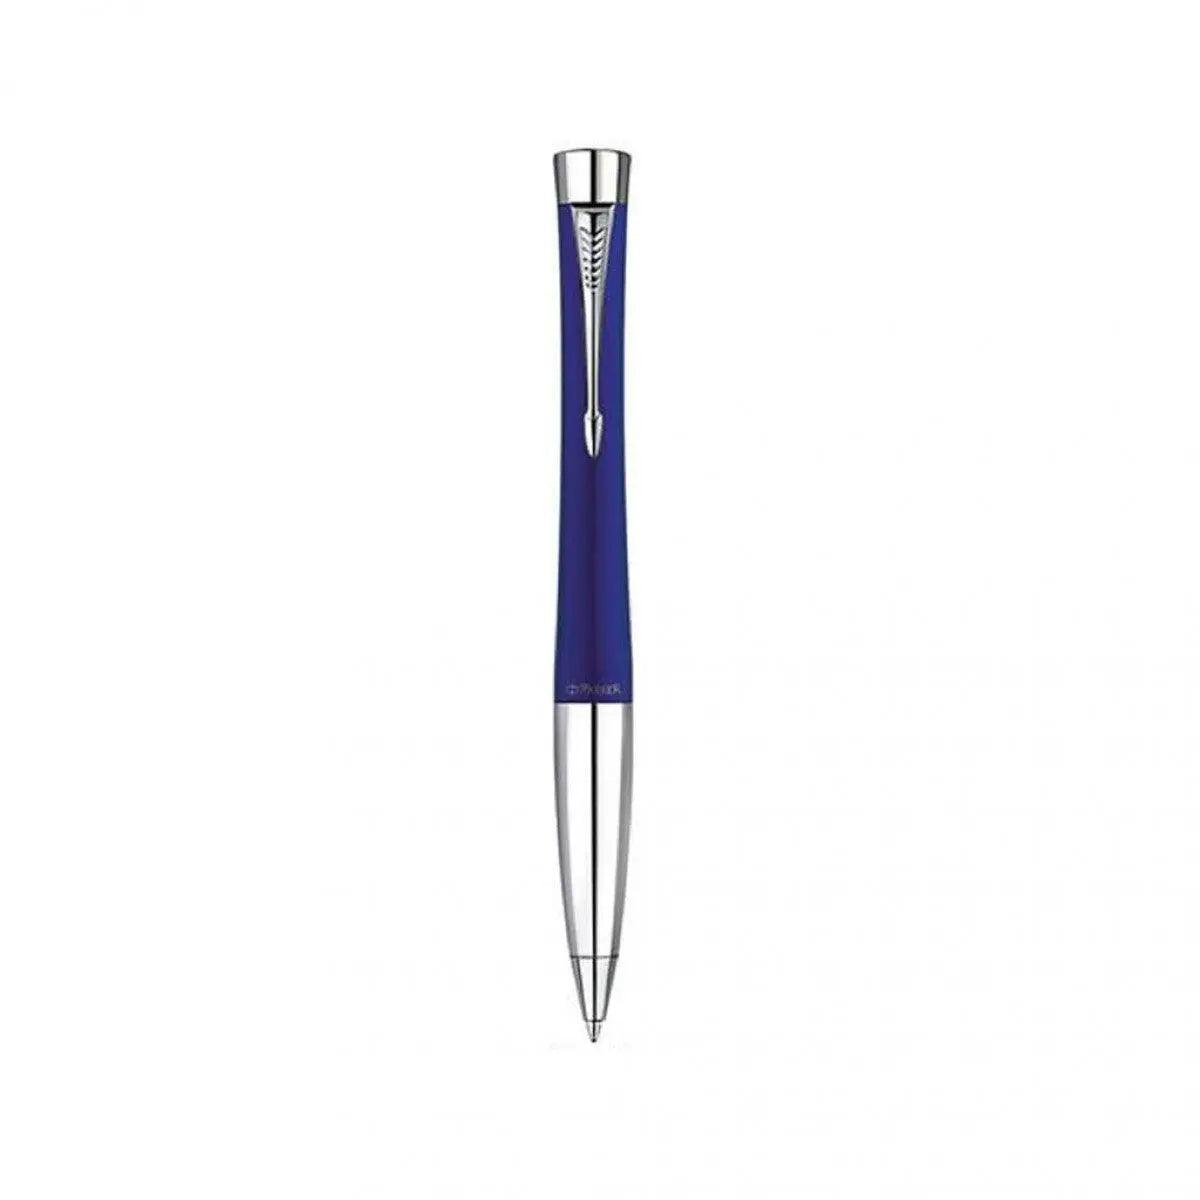 Parker Urban CT Ballpoint The Stationers